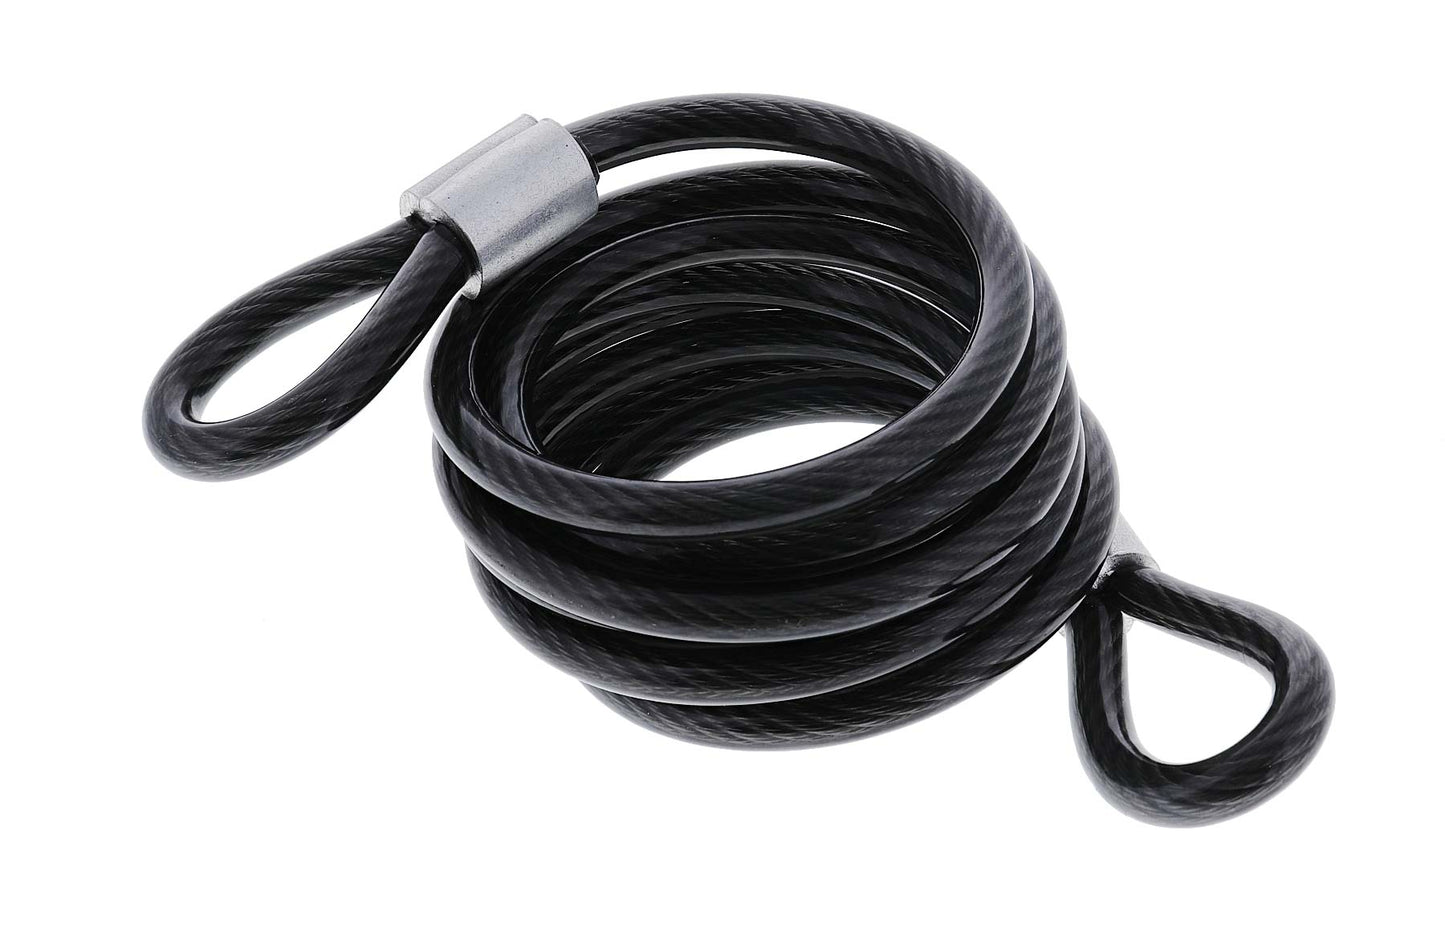 Carbine C30036cb Vinyl coated cable, 8MM x 1800MM